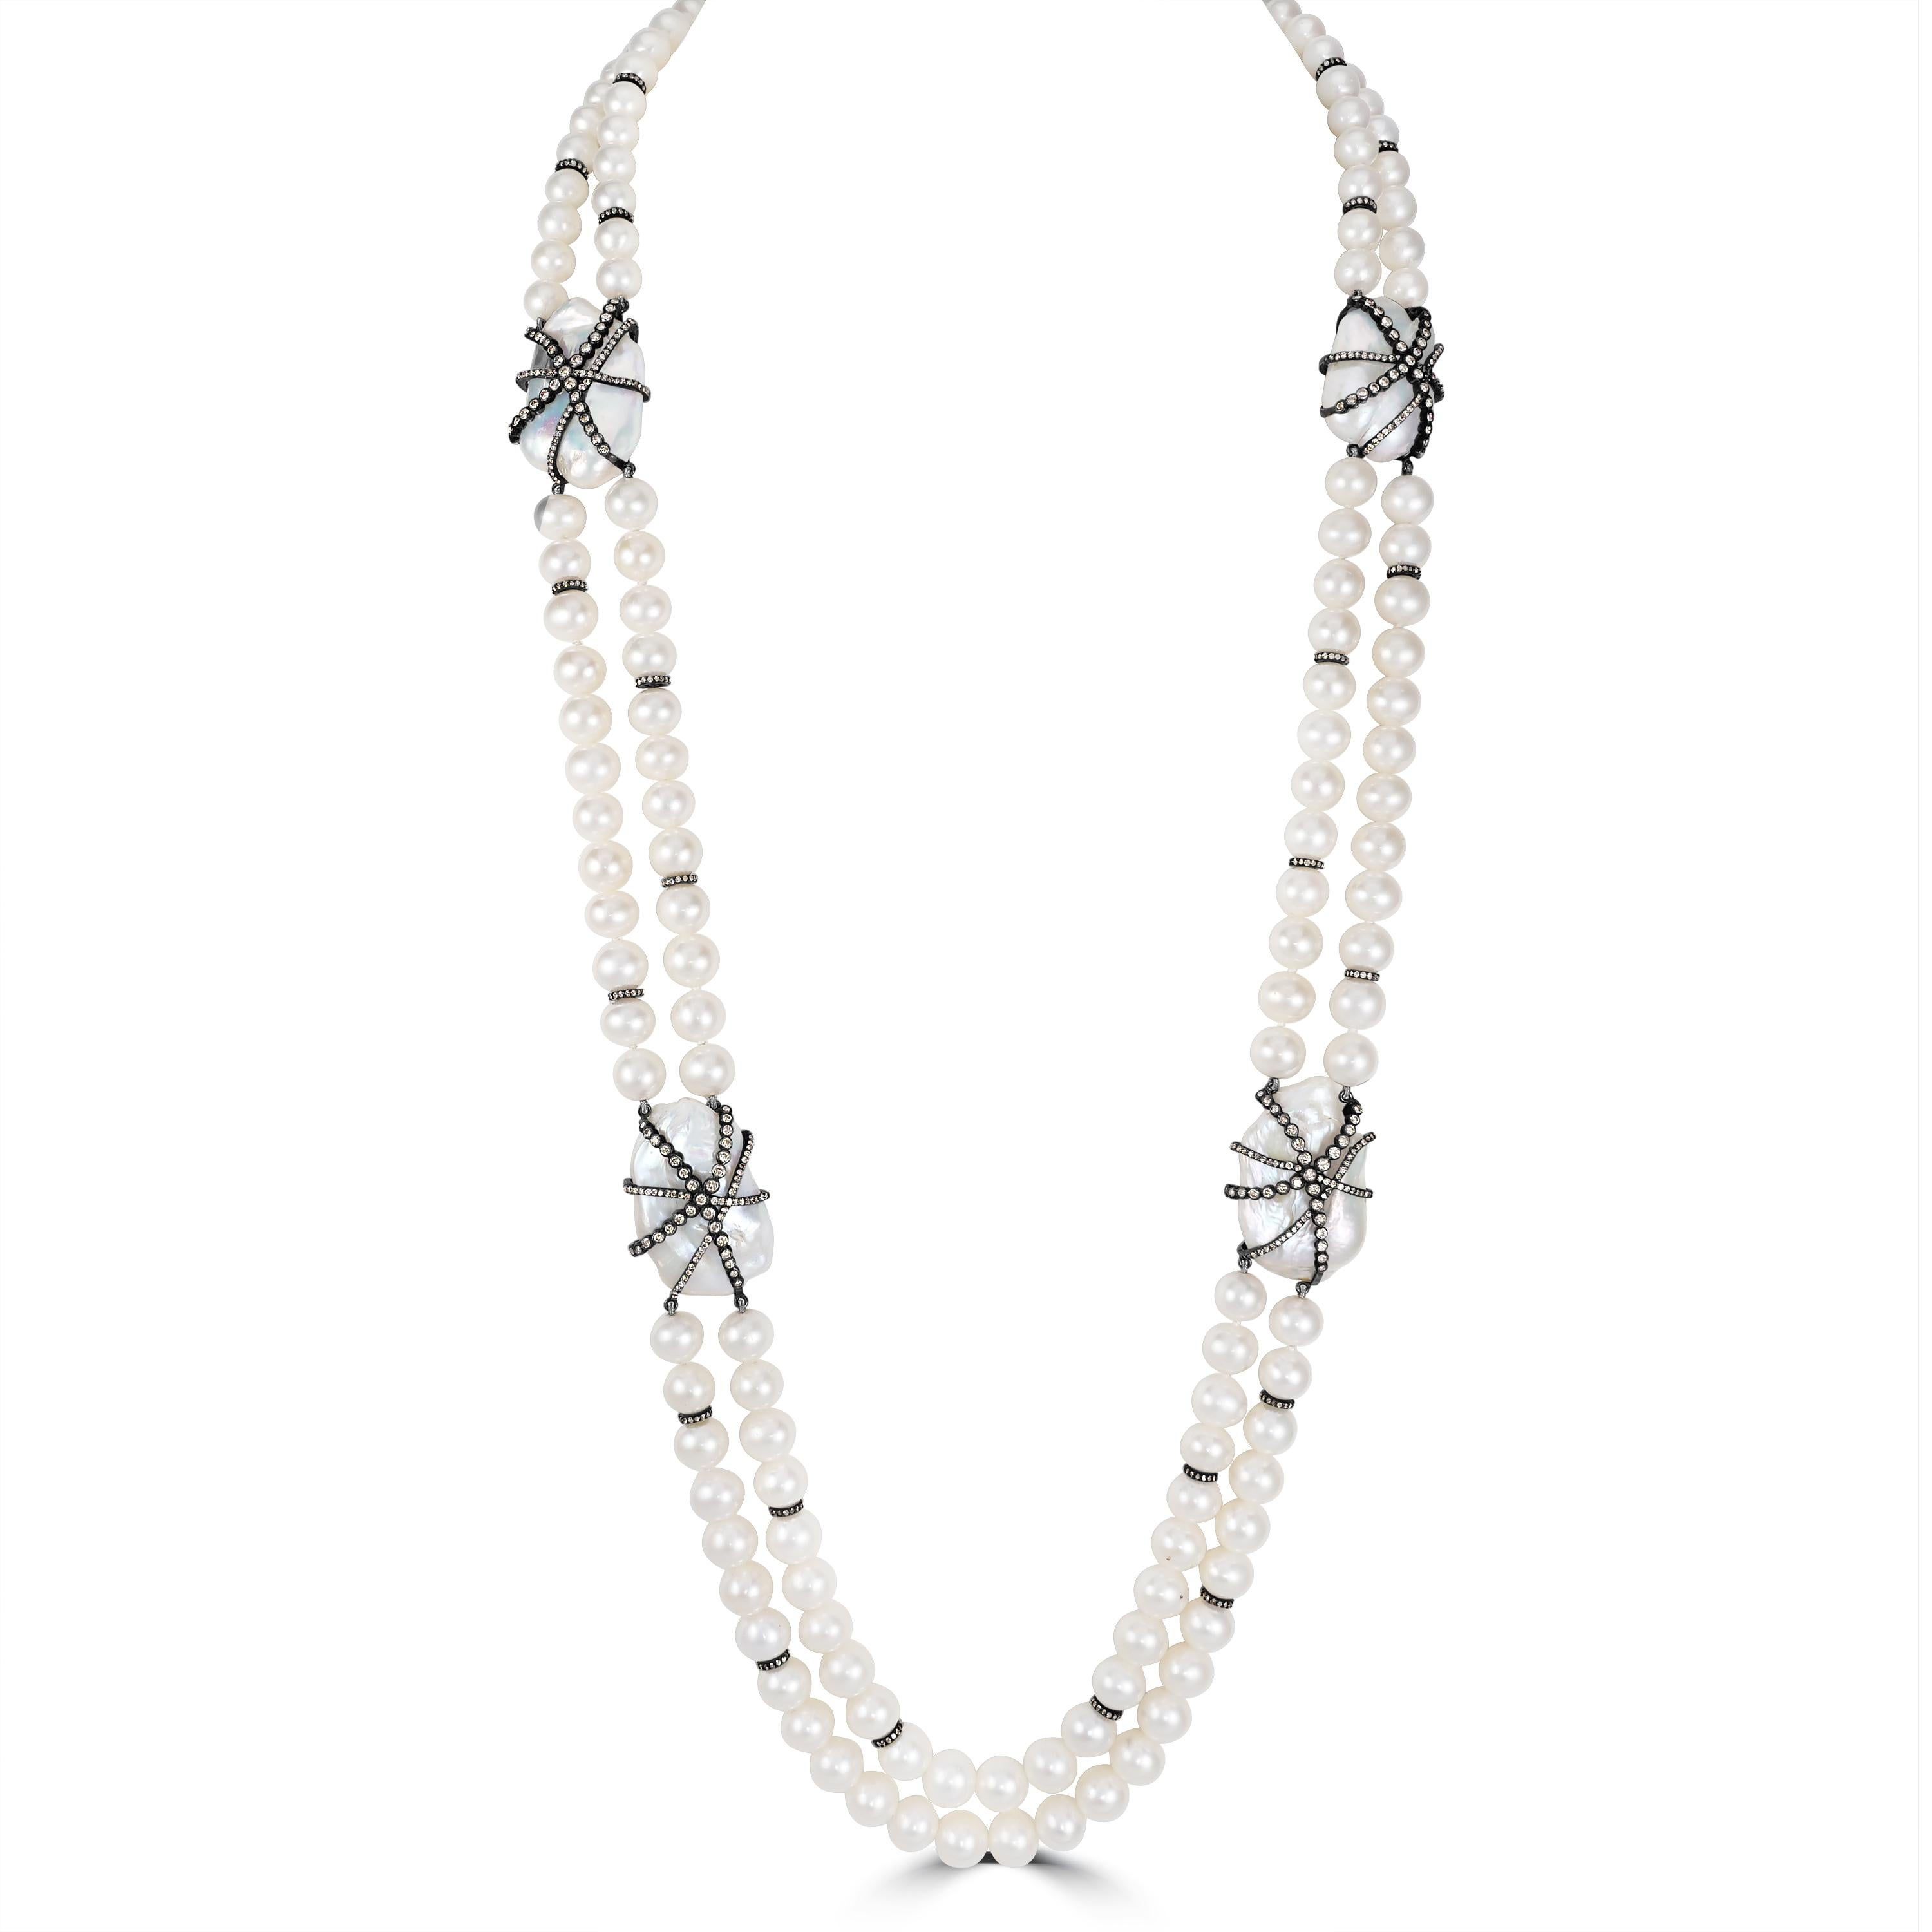 Indulge in timeless elegance with our Victorian Pearl and Diamond Beaded Necklace, a luxurious statement piece that exudes sophistication and grace.

Crafted with meticulous attention to detail, this exquisite necklace features a 36-inch strand of